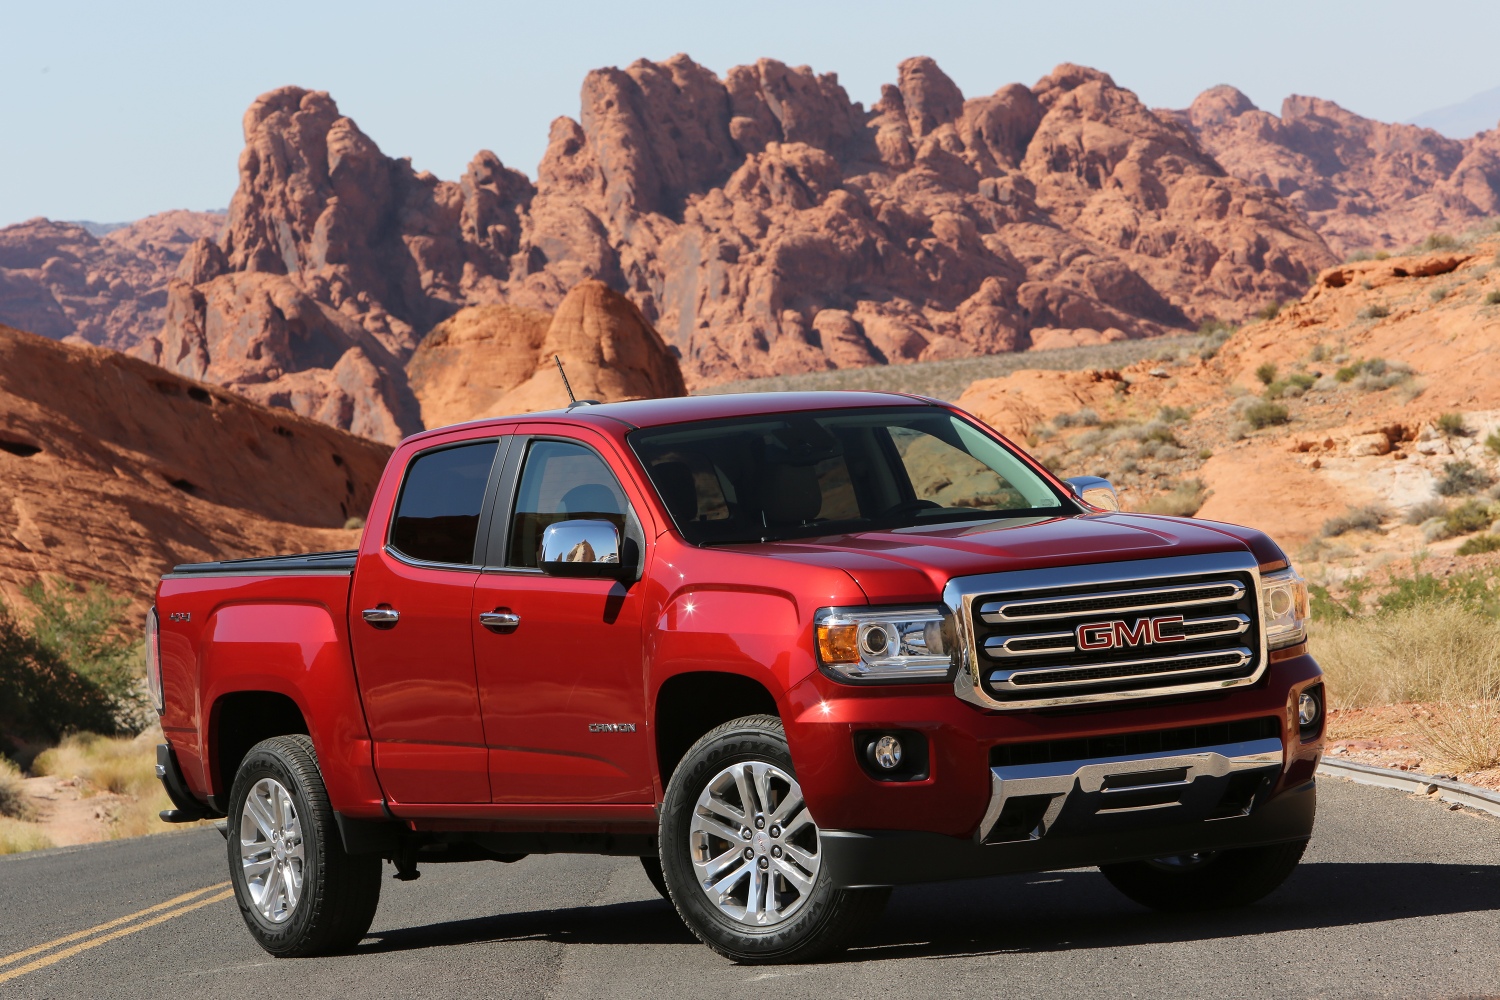 These popular and reliable compact pickup trucks like the GMC Canyon